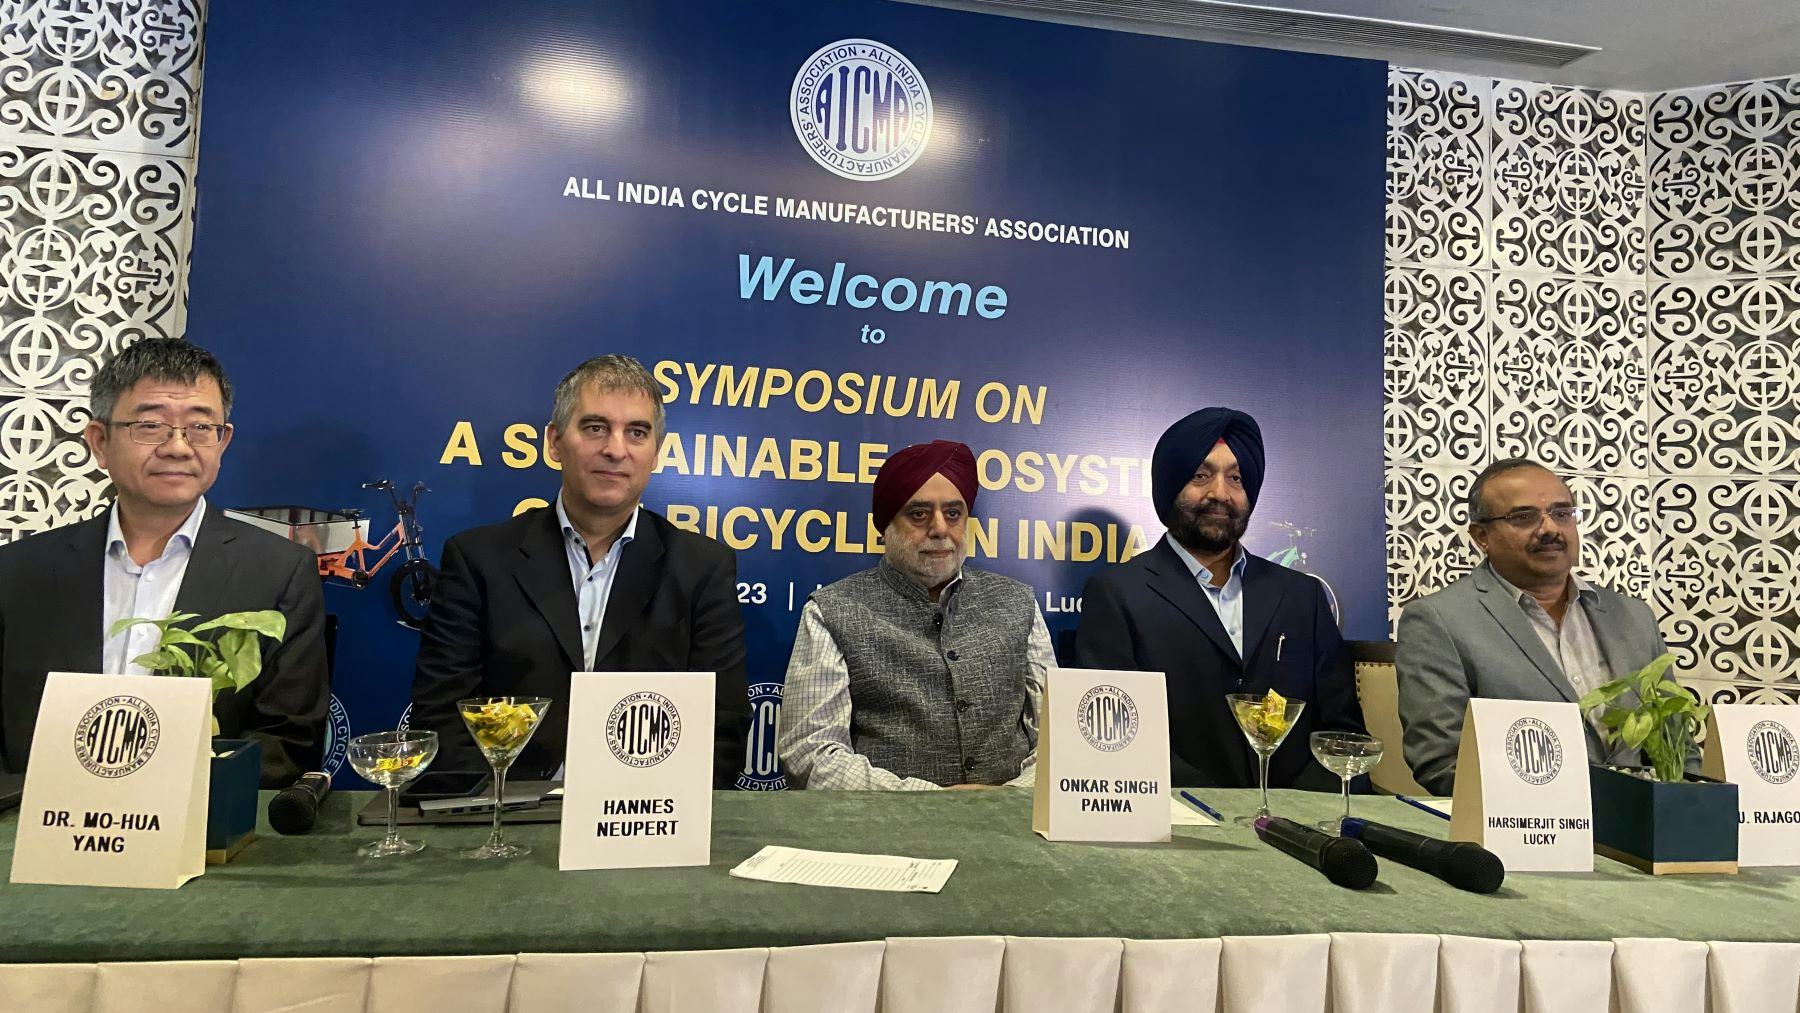 Left to right: Dr Mo-Hua Yang, President of EnergyBus, Hannes Neupert, President of ExtraEnergy and Board Member of EnergyBus, Onkar Singh, Managing Director, Avon Cycles Limited and Chairman R&D taskforce, AICMA, Harsimerjit Singh, President of trade body UCPMA (United Cycle and Parts Manufacturers Association) and U Rajagopal, President, AICMA at the industry event in November. – Photo Satnam Singh